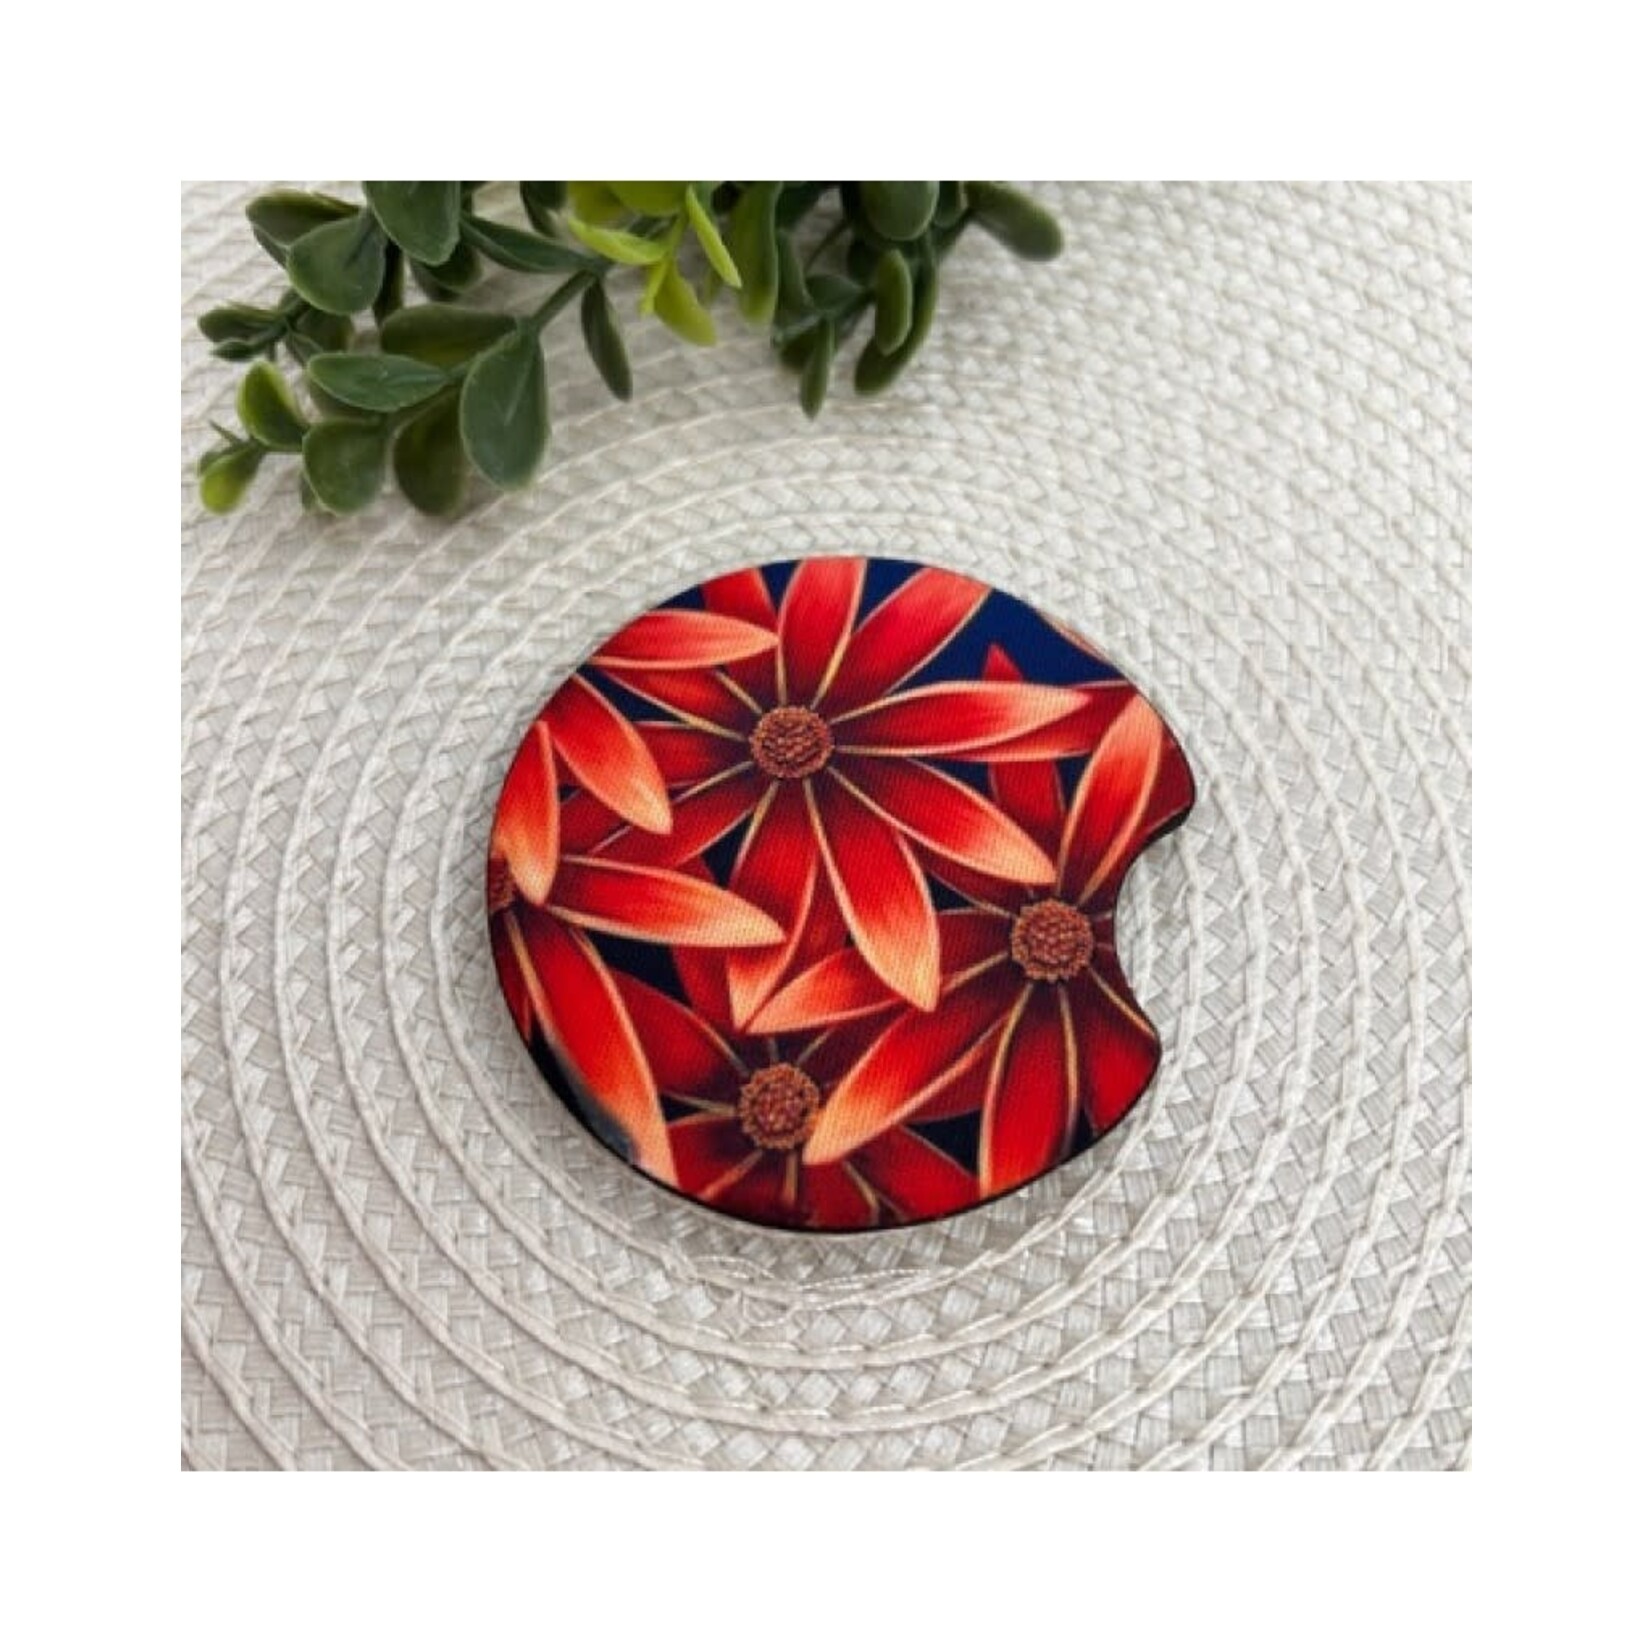 Denise Cassidy Wood Collection Car Coaster - Denise Cassidy Wood Collection